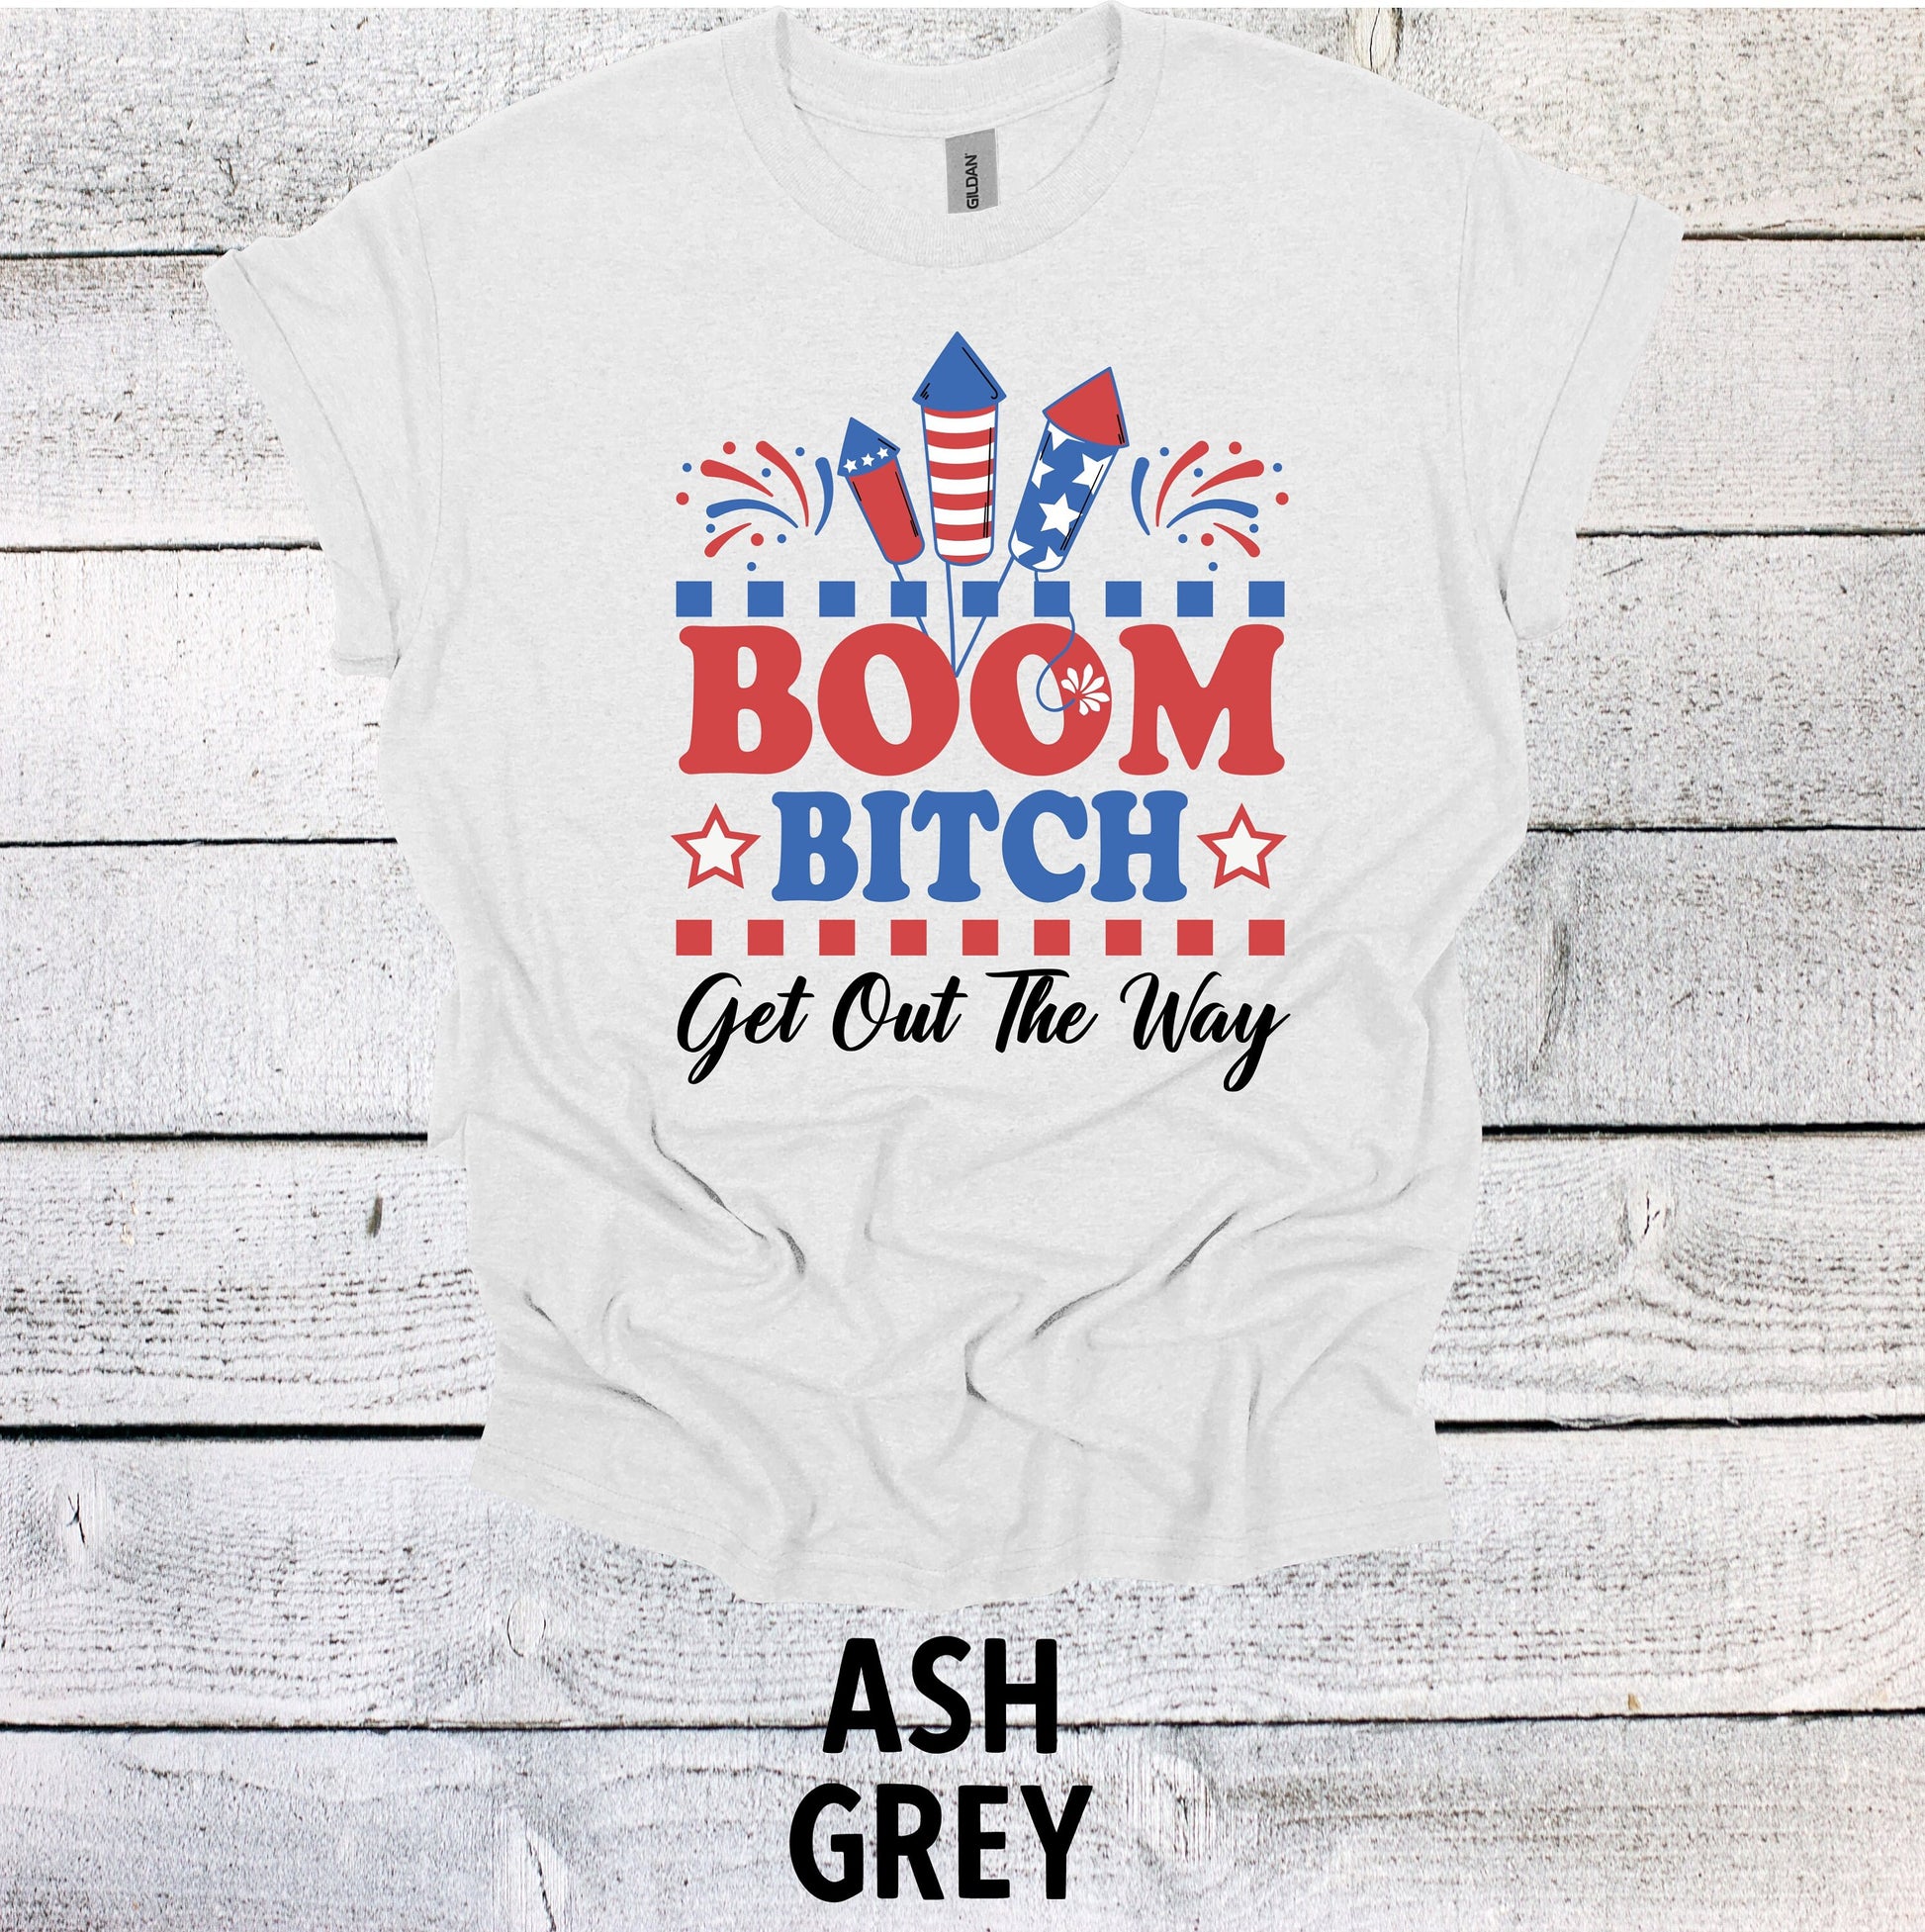 Funny July 4th Shirt - Boom Bitch Get out the Way Patriotic Tee